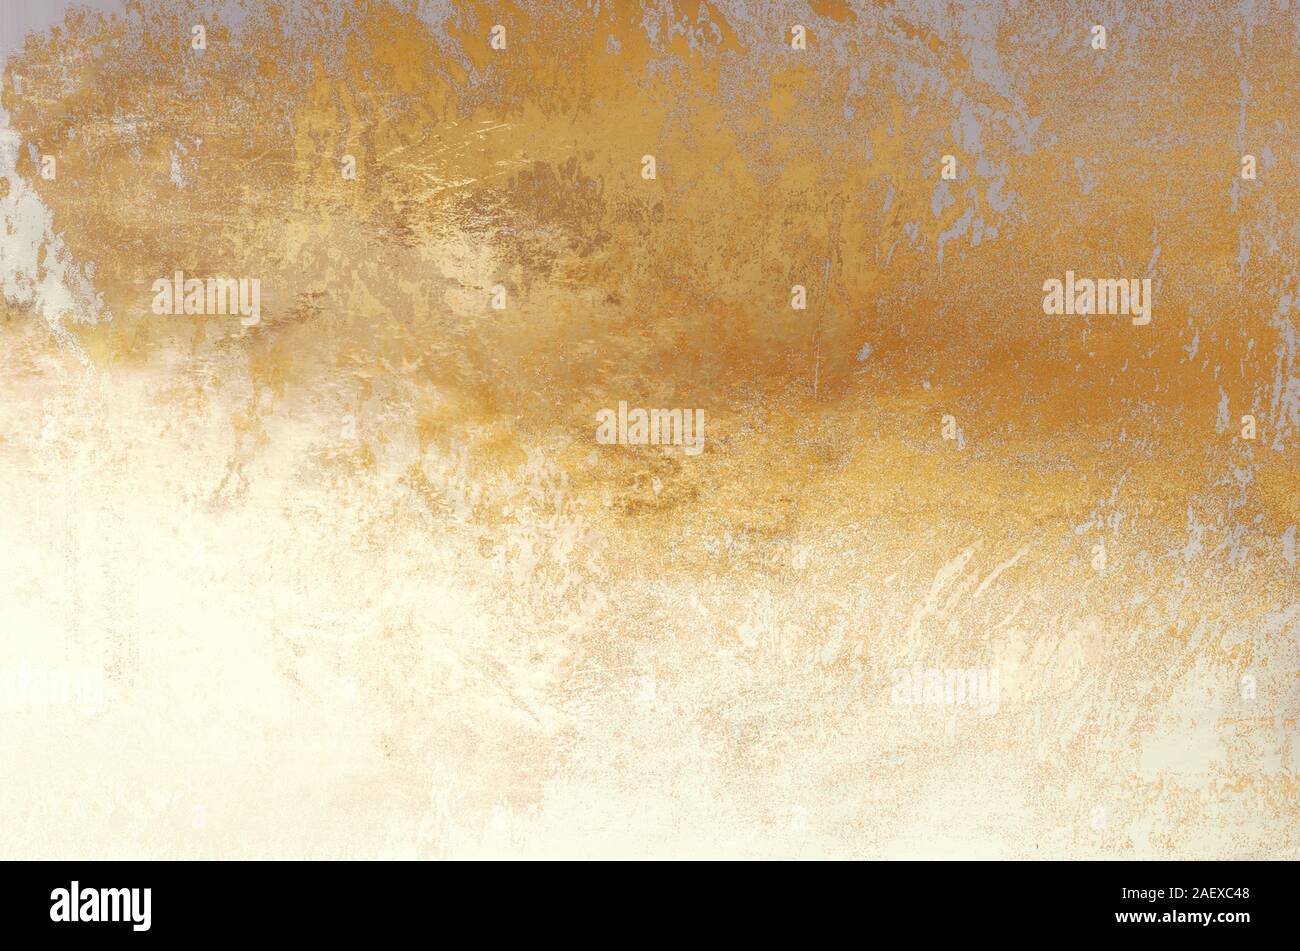 Grunge Metallic Gold abstract background texture. Banque D'Images